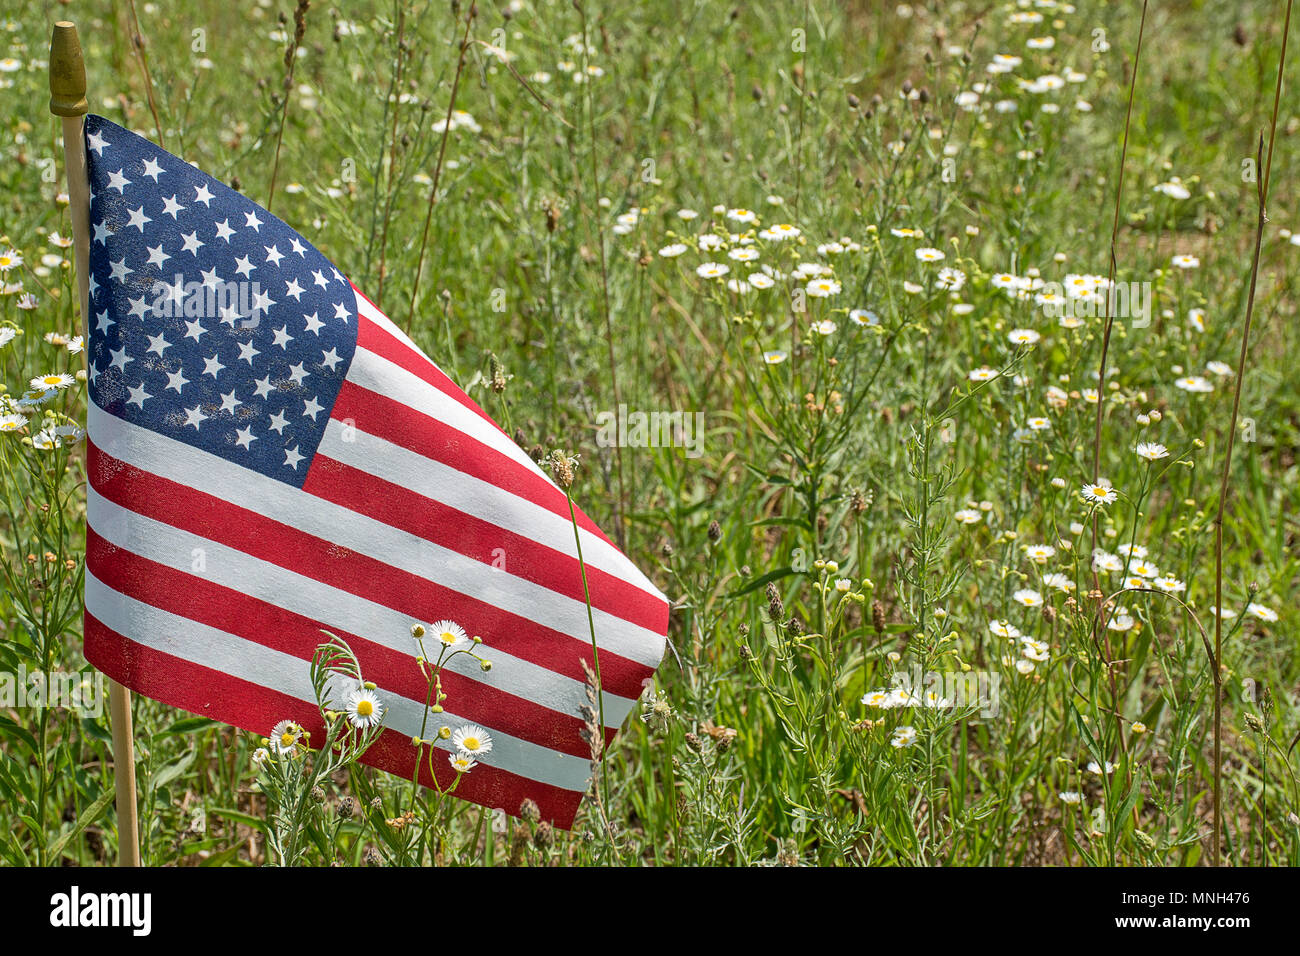 American flag in a country field of white daisy wildflowers Stock Photo